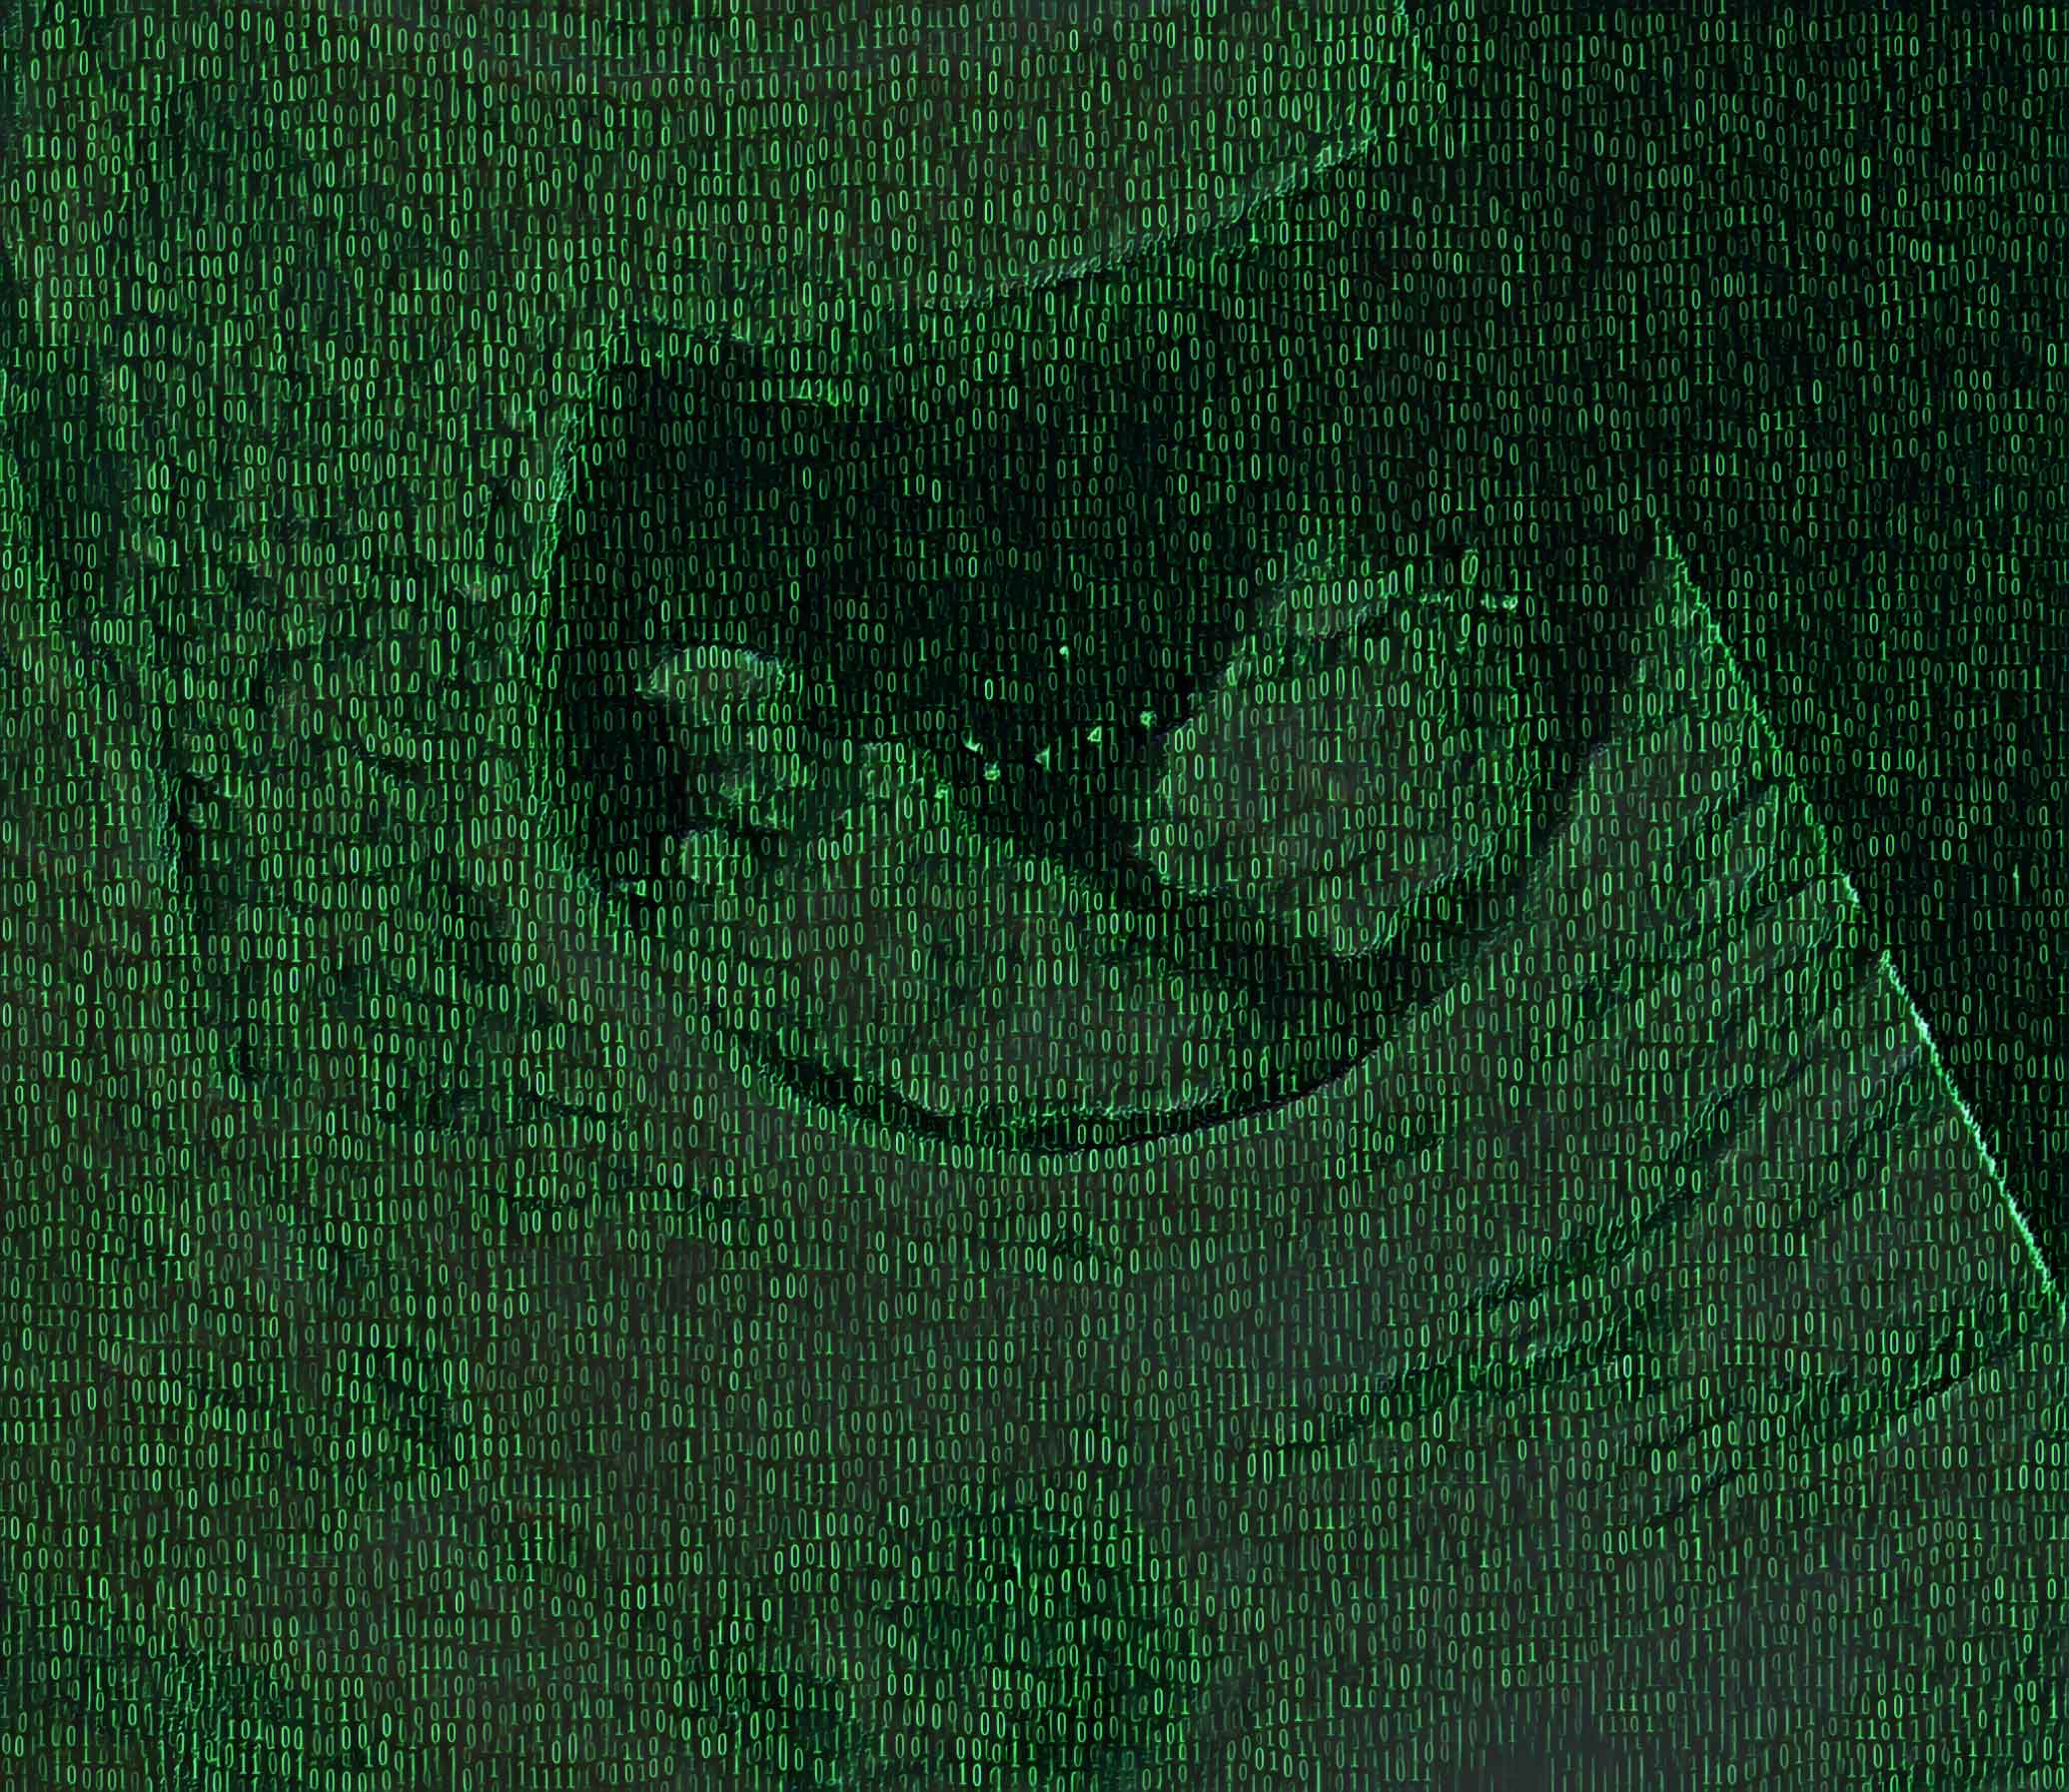 an image of a fetus in the style of the matrix